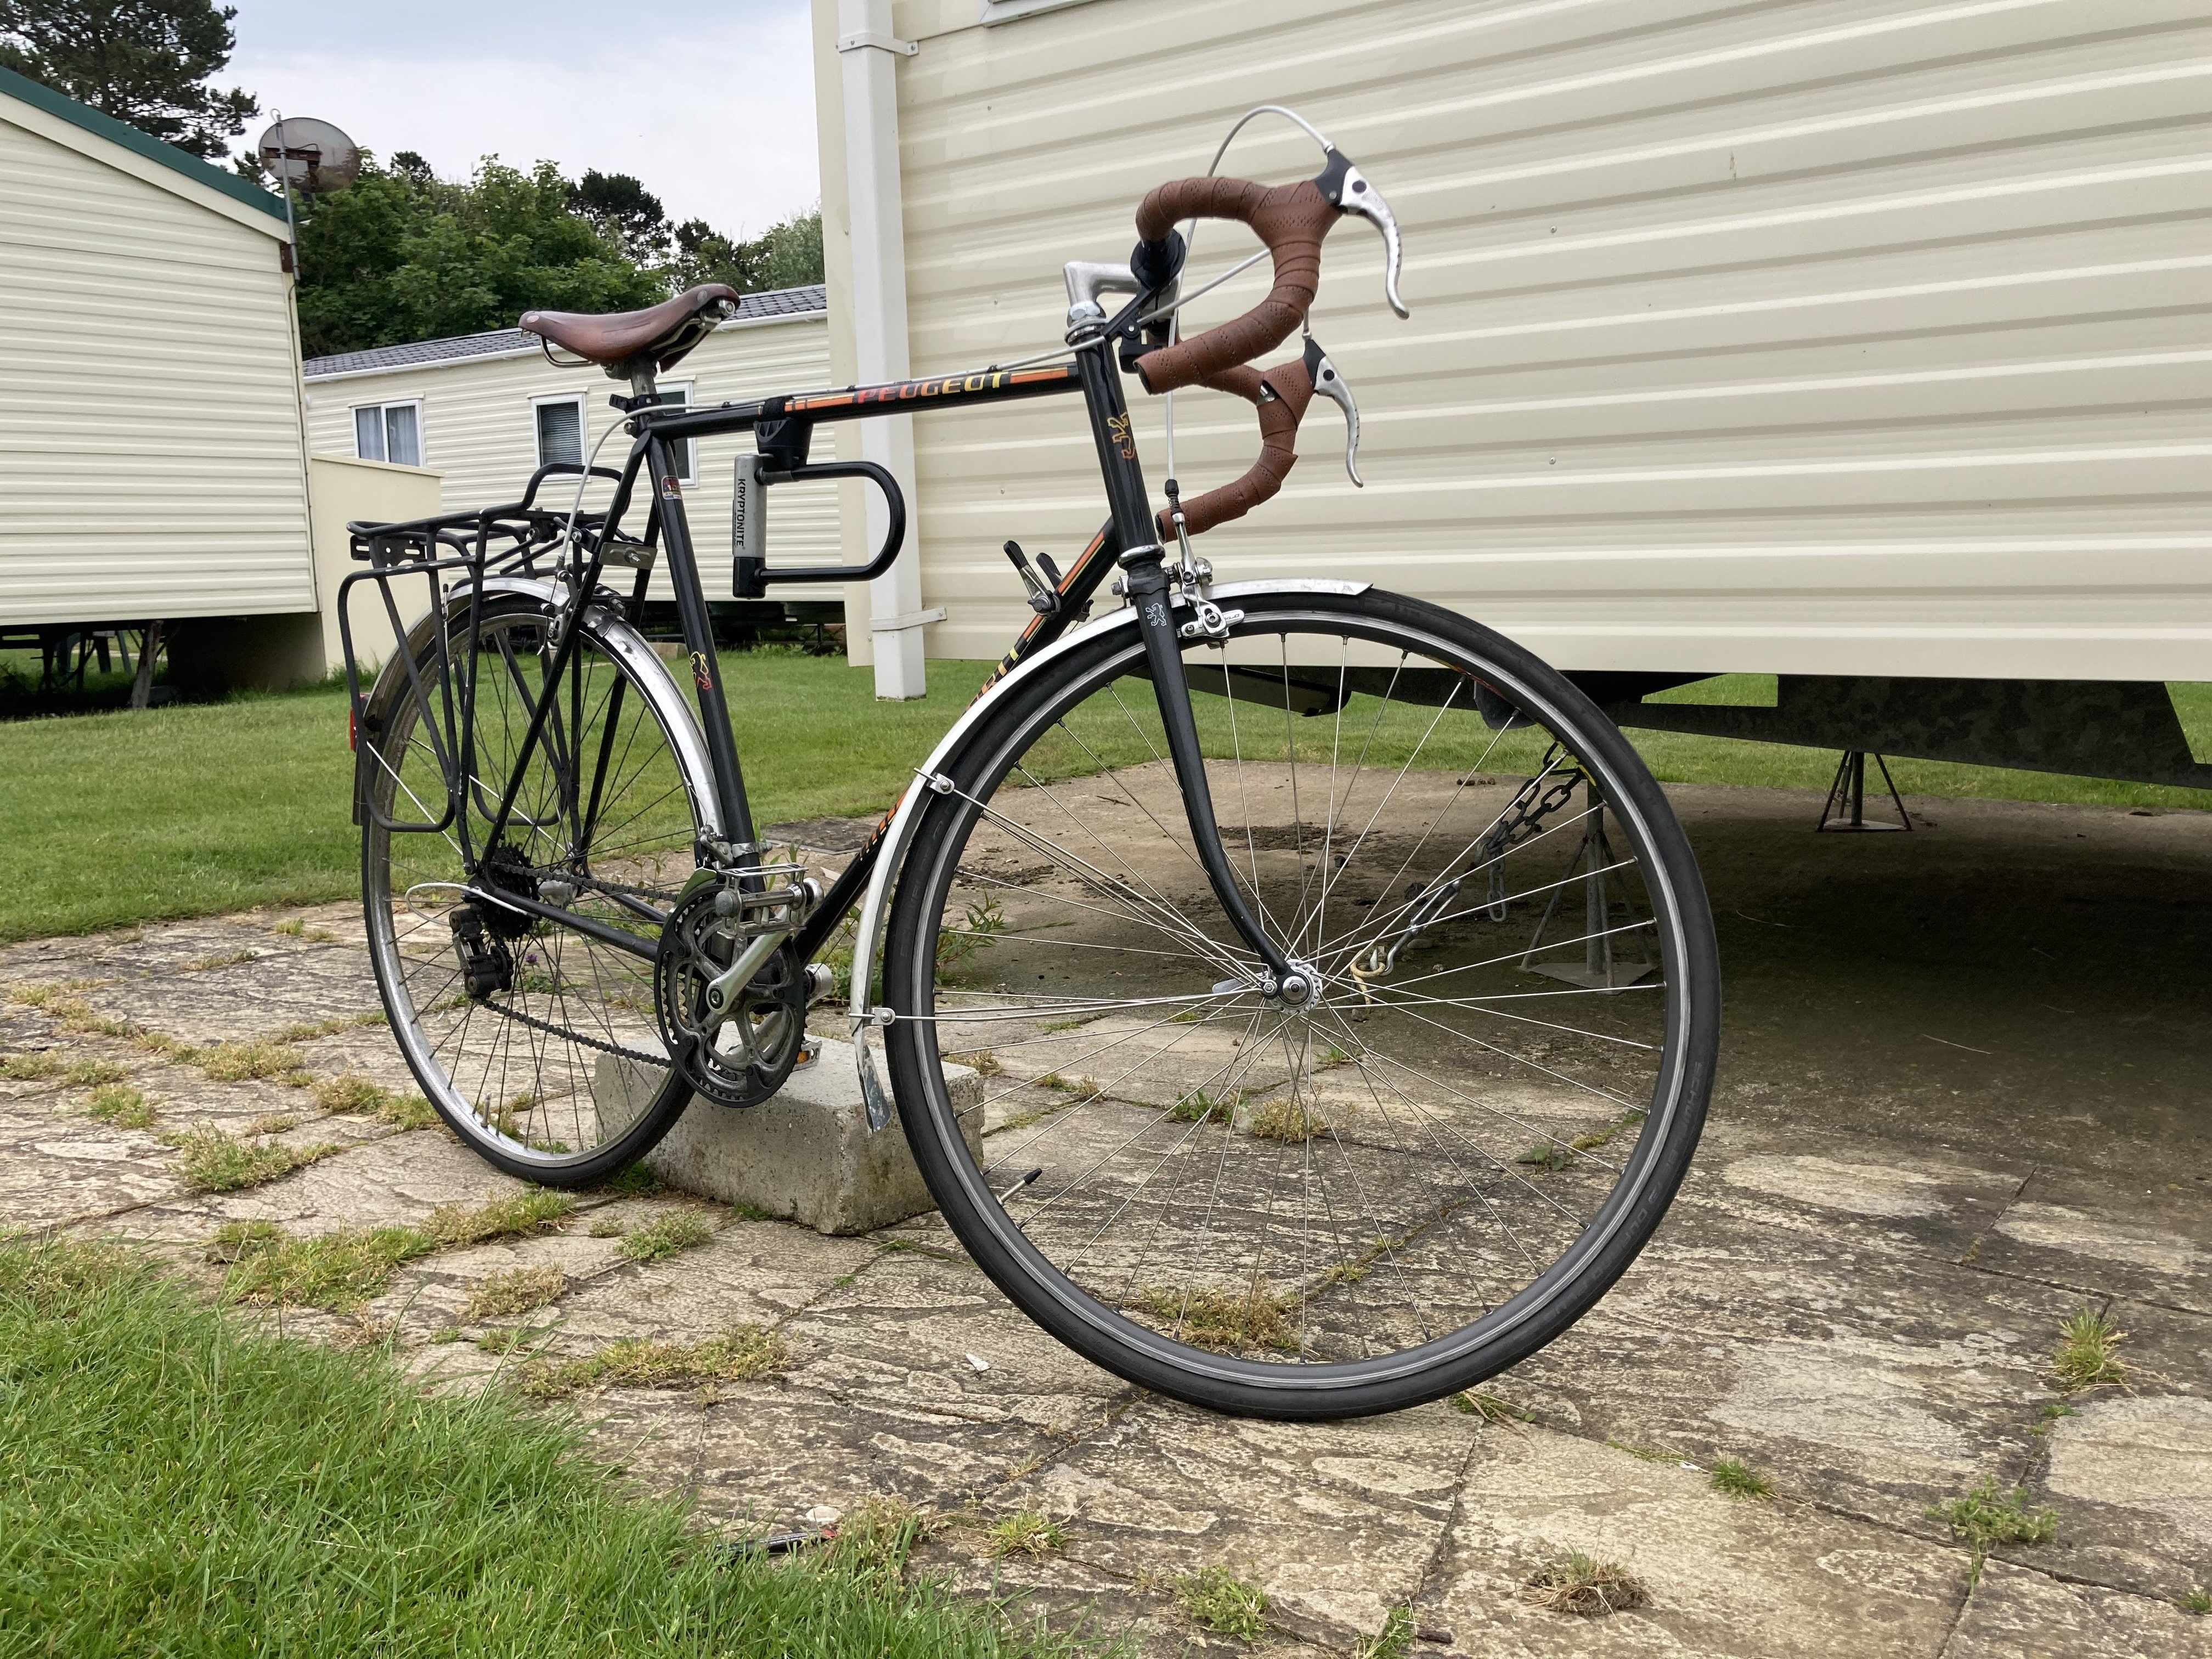 A vintage Peugeot bike, standing majestically in front of some caravans